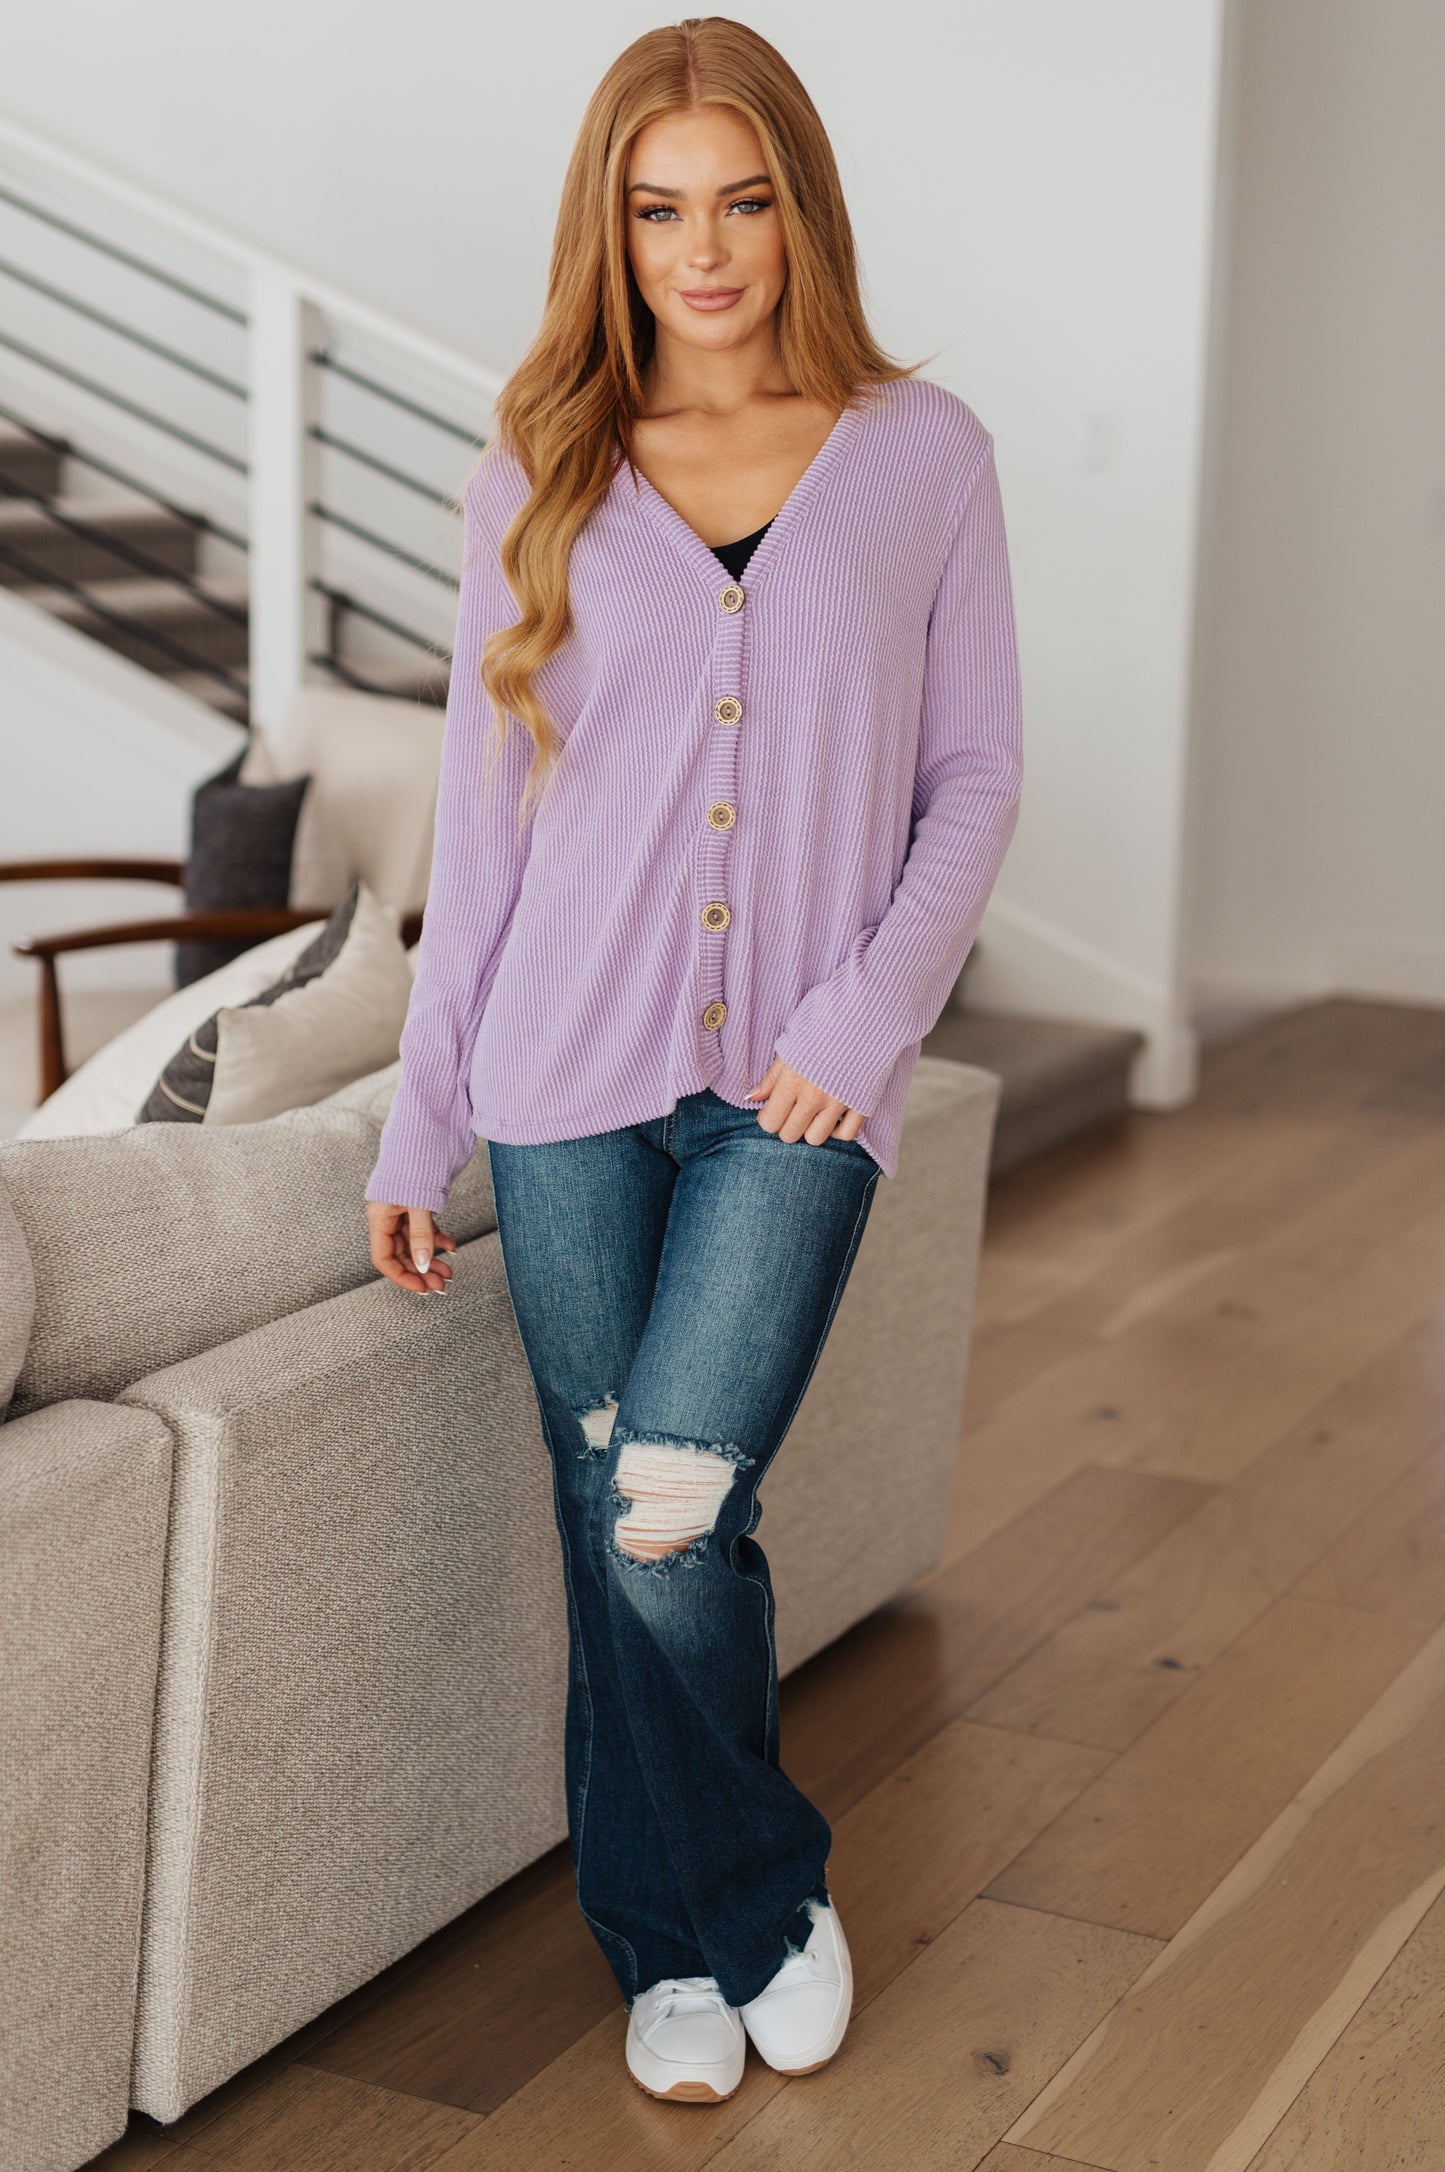 Look your best in the Dilly Dally Ribbed Cardigan. Featuring a chic v-neckline and textured rib knit design, this cardigan is comfortable yet stylish. Button front closure makes it easy to put on and take off, with a flattering easy fit. Feel confident and look great with the Dilly Dally Cardigan! S - 3X